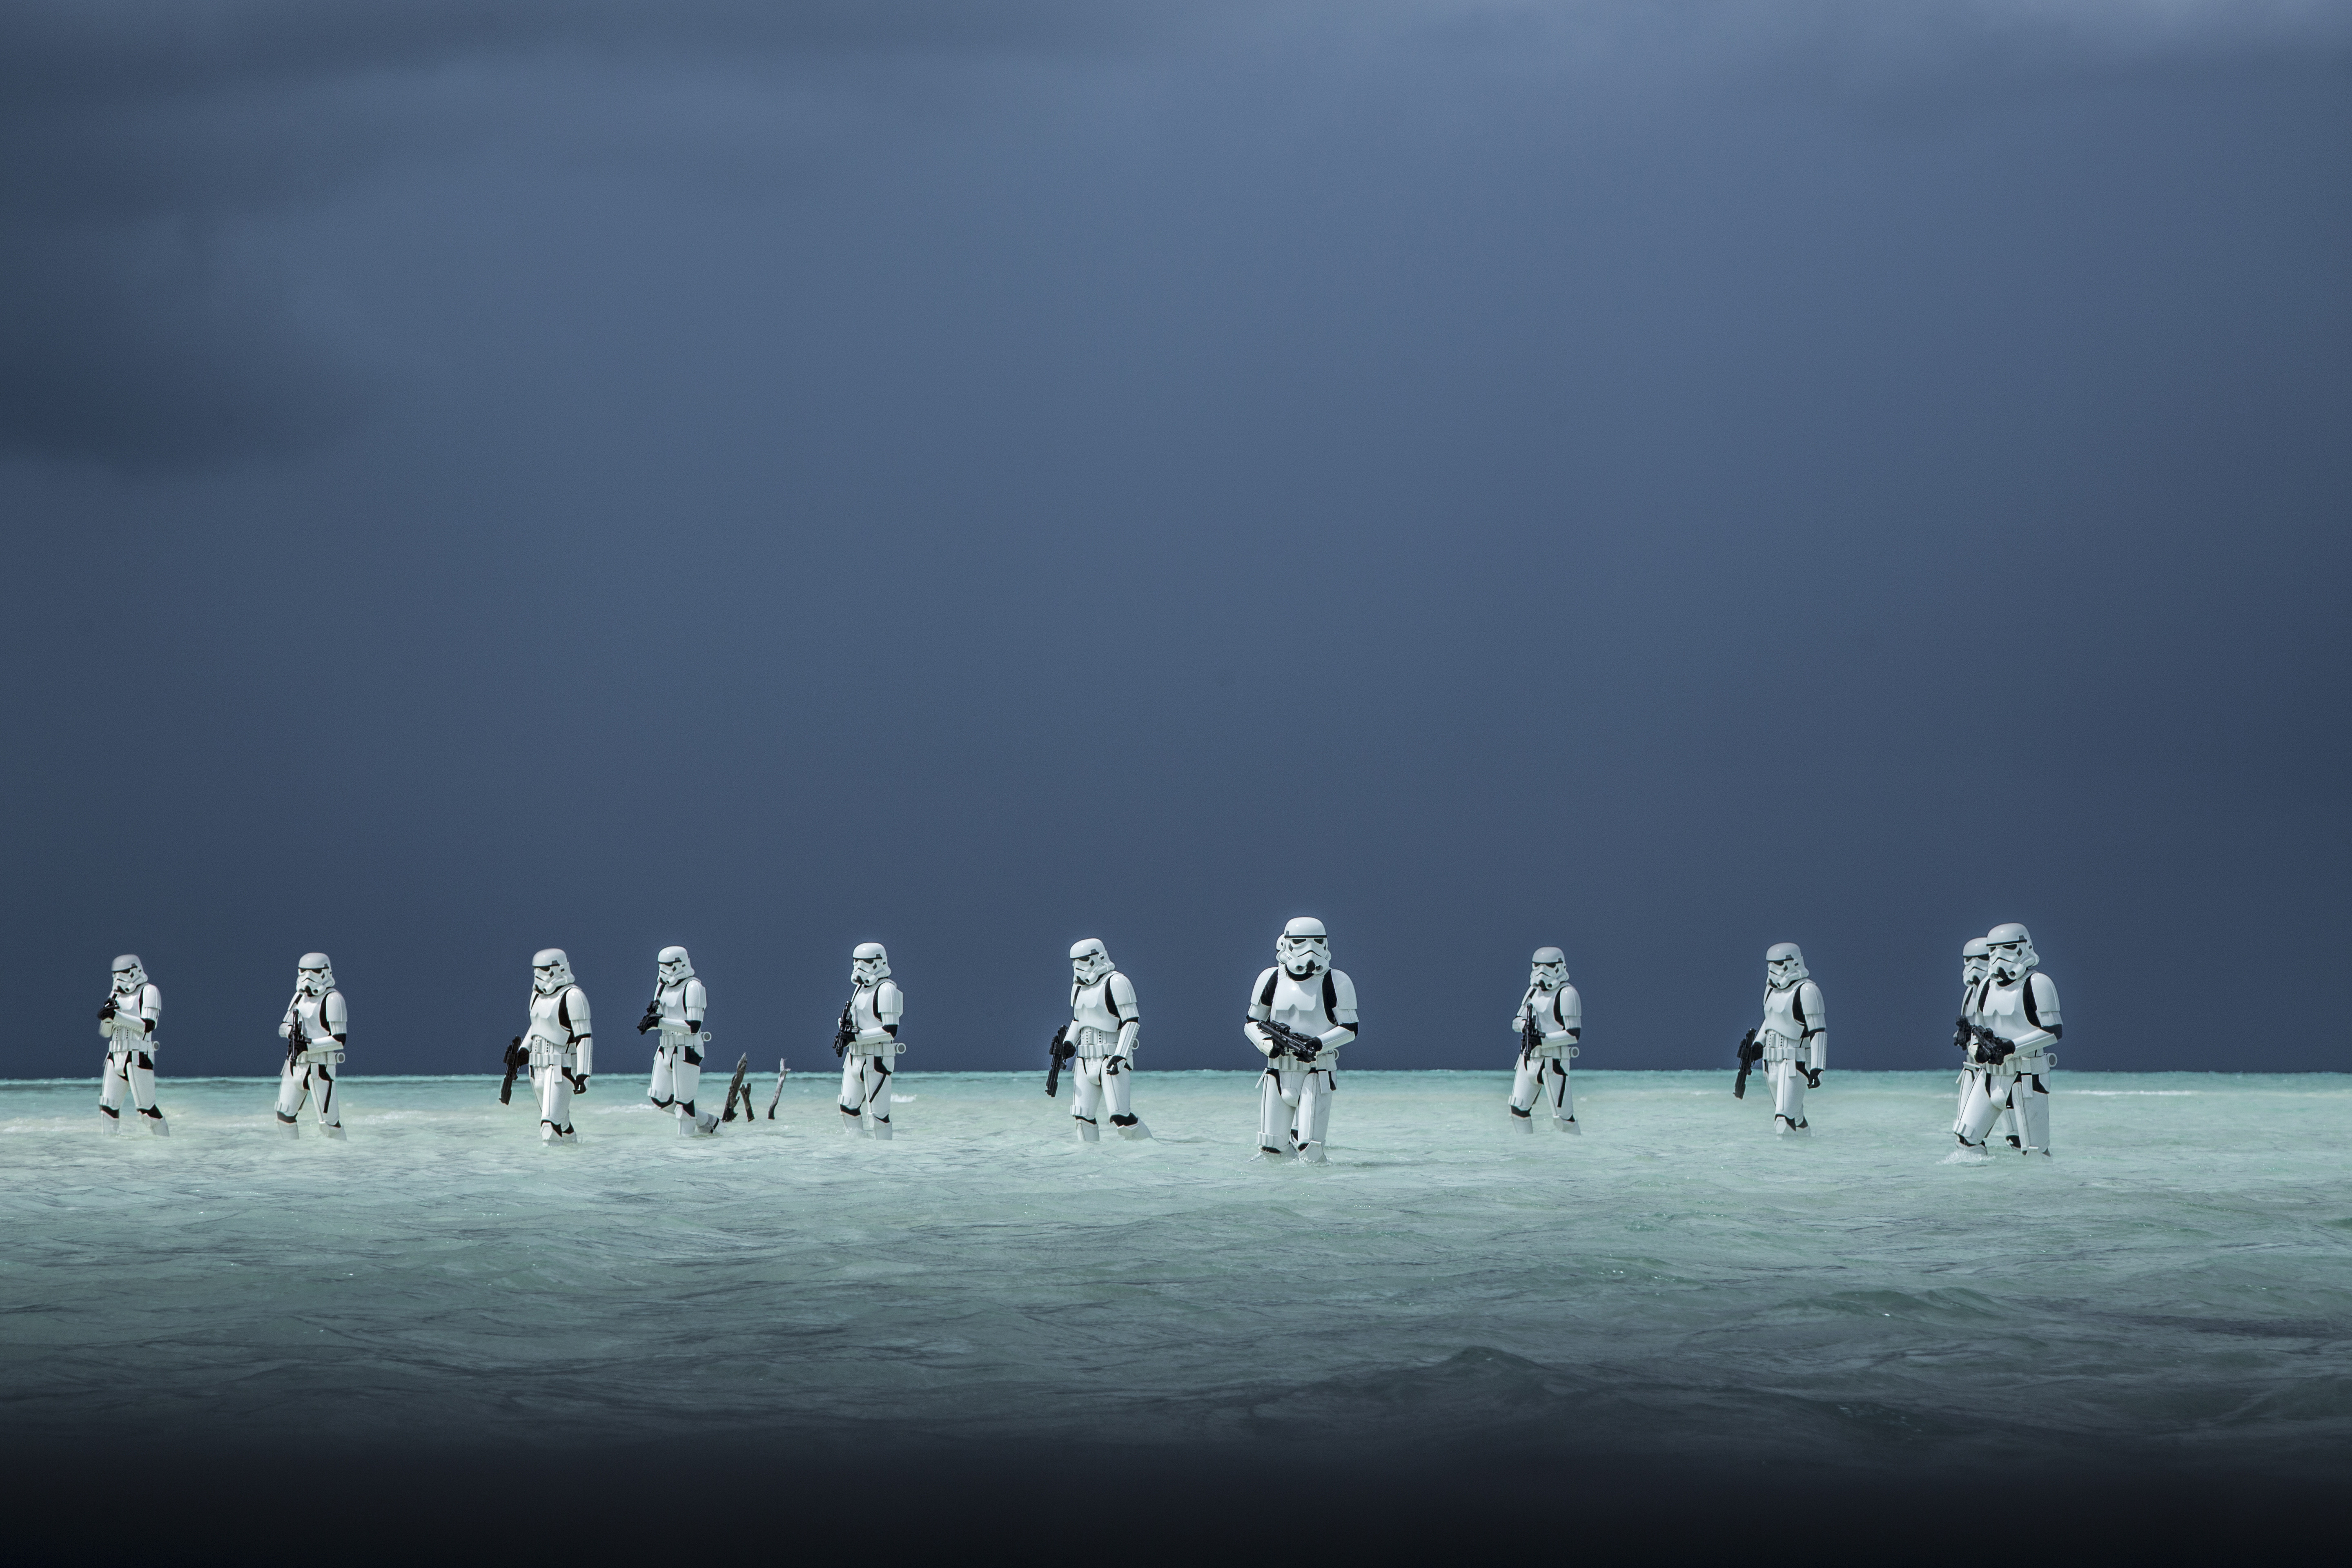 “Rogue One: A Star Wars Story” World Premiere to Stream Live on StarWars.com